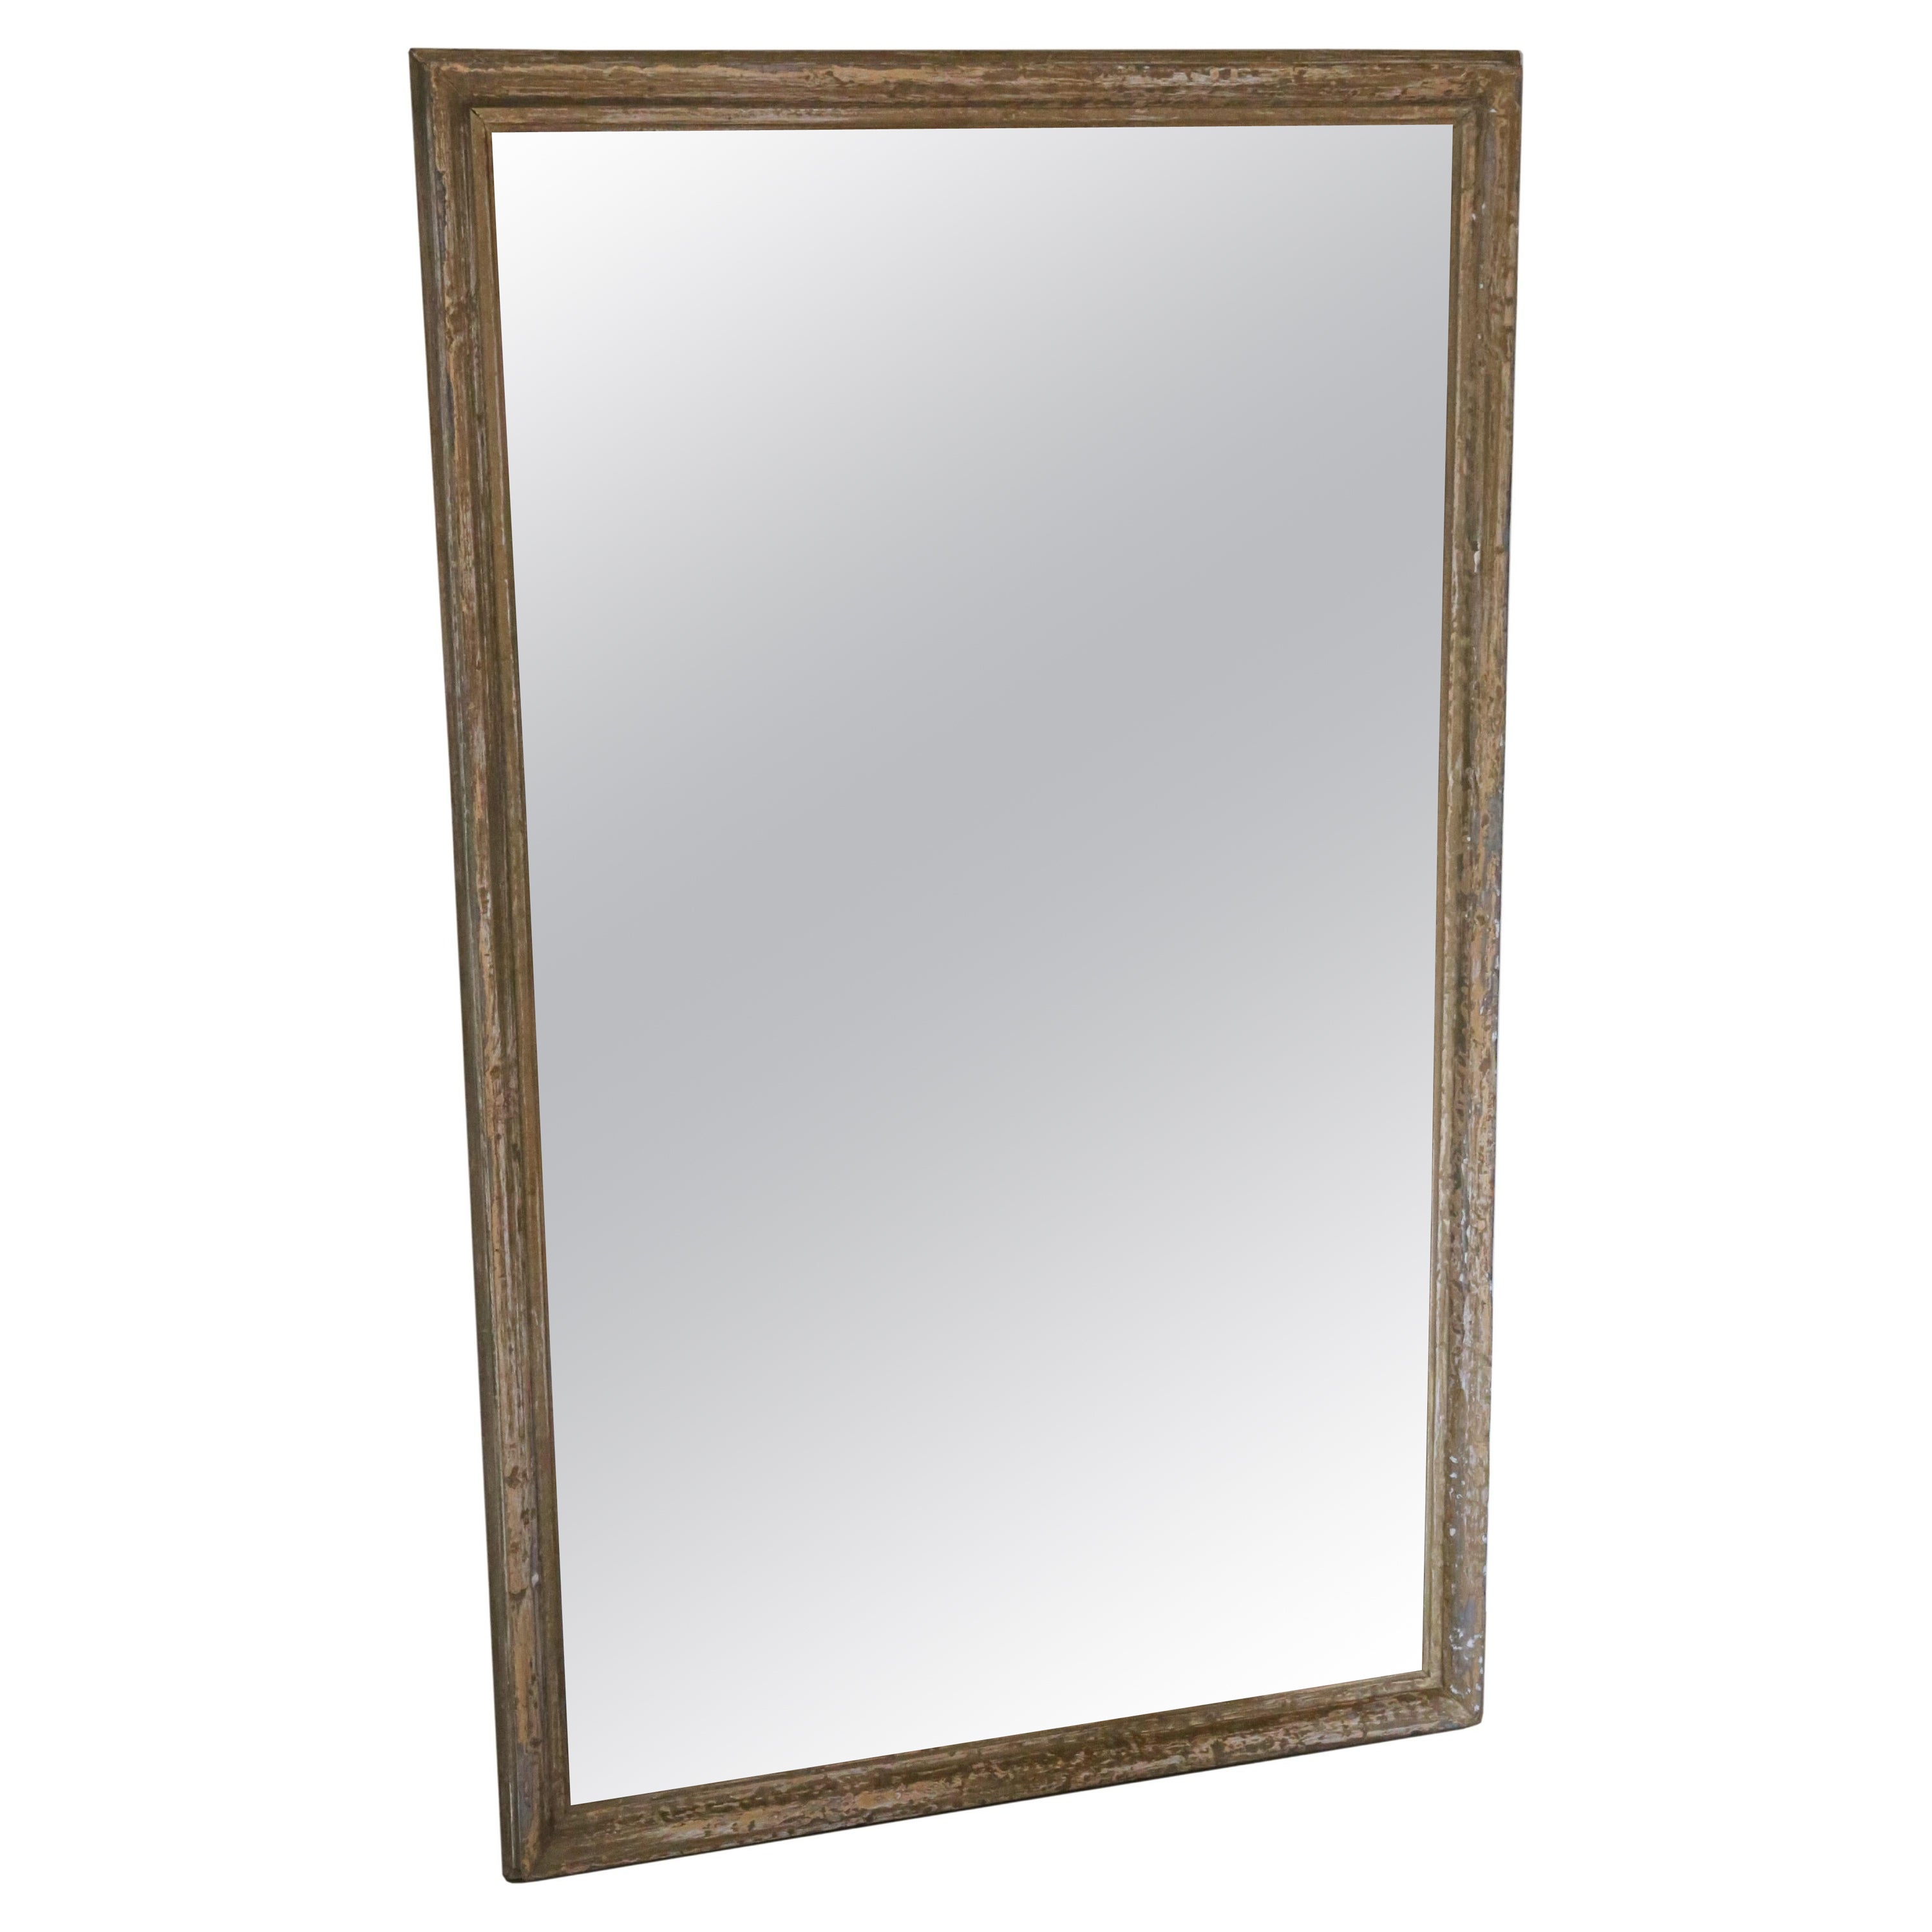 What are large mirrors called?